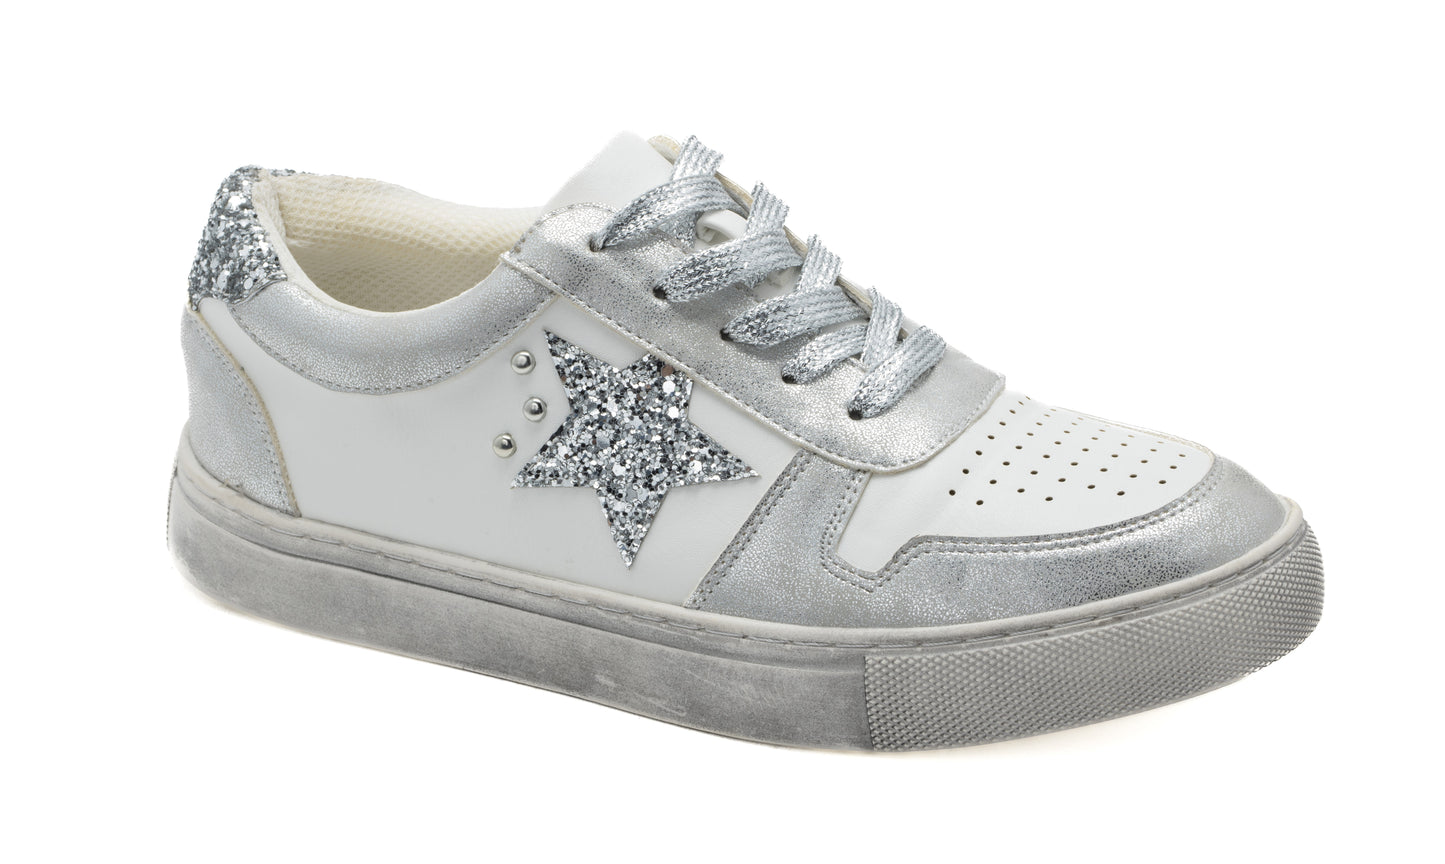 The Constellation Silver Sneakers